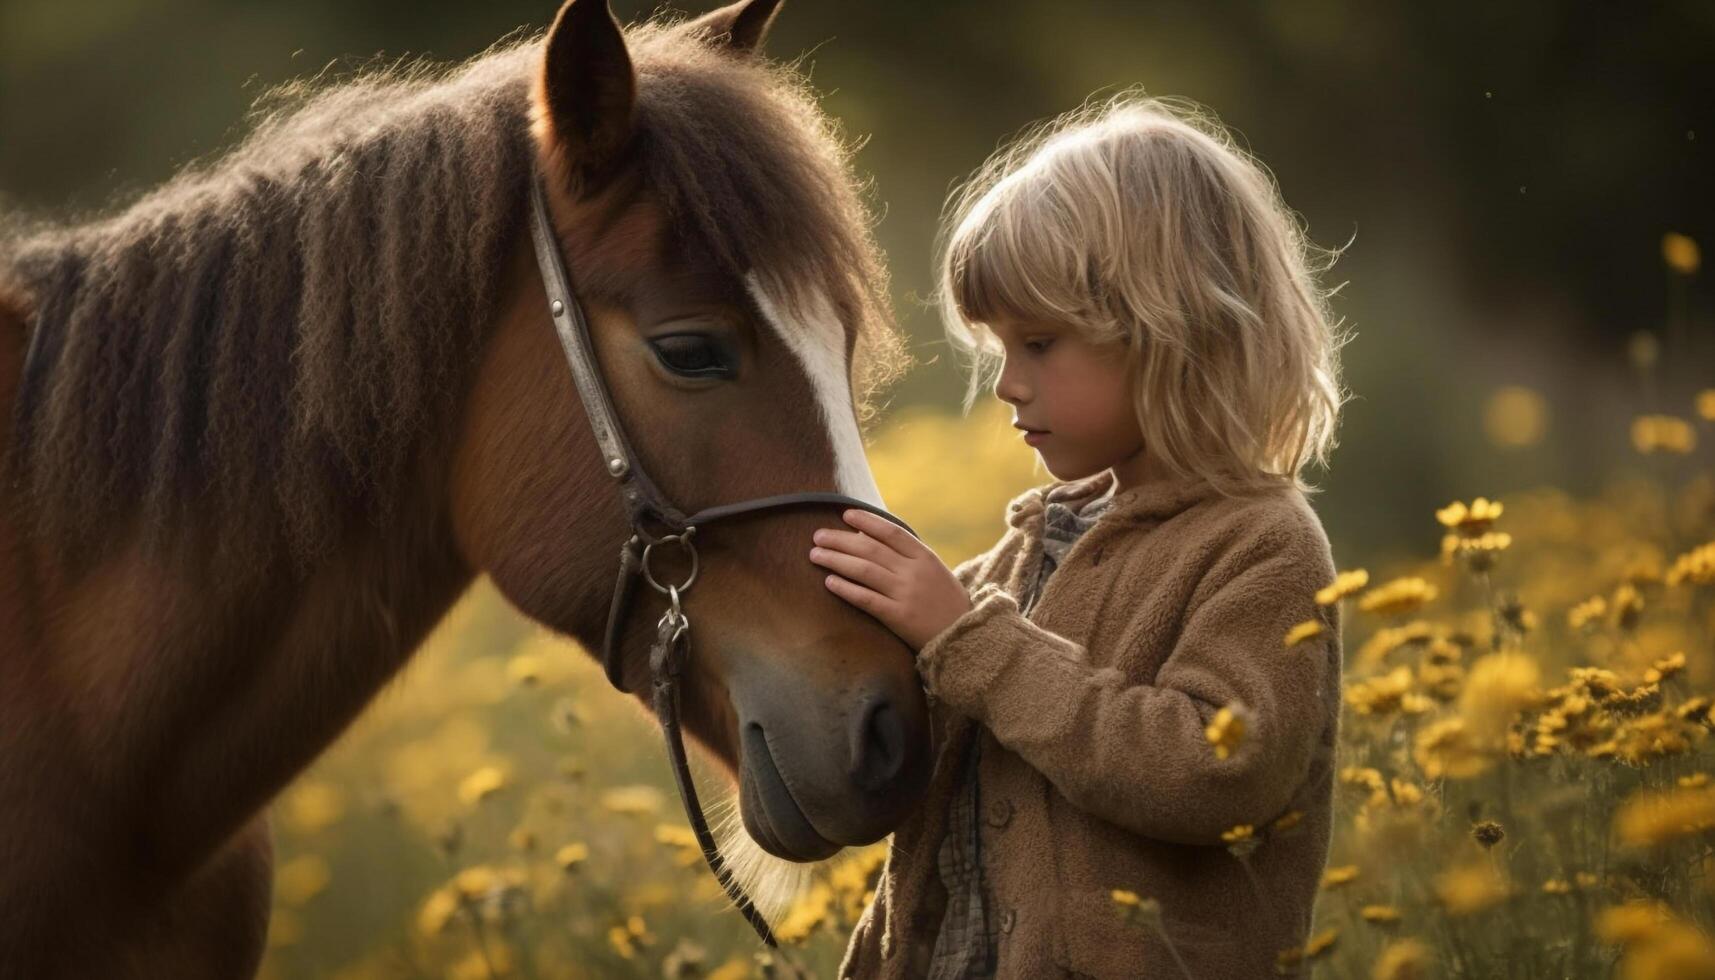 Cute girl smiling, bonding with horse outdoors photo